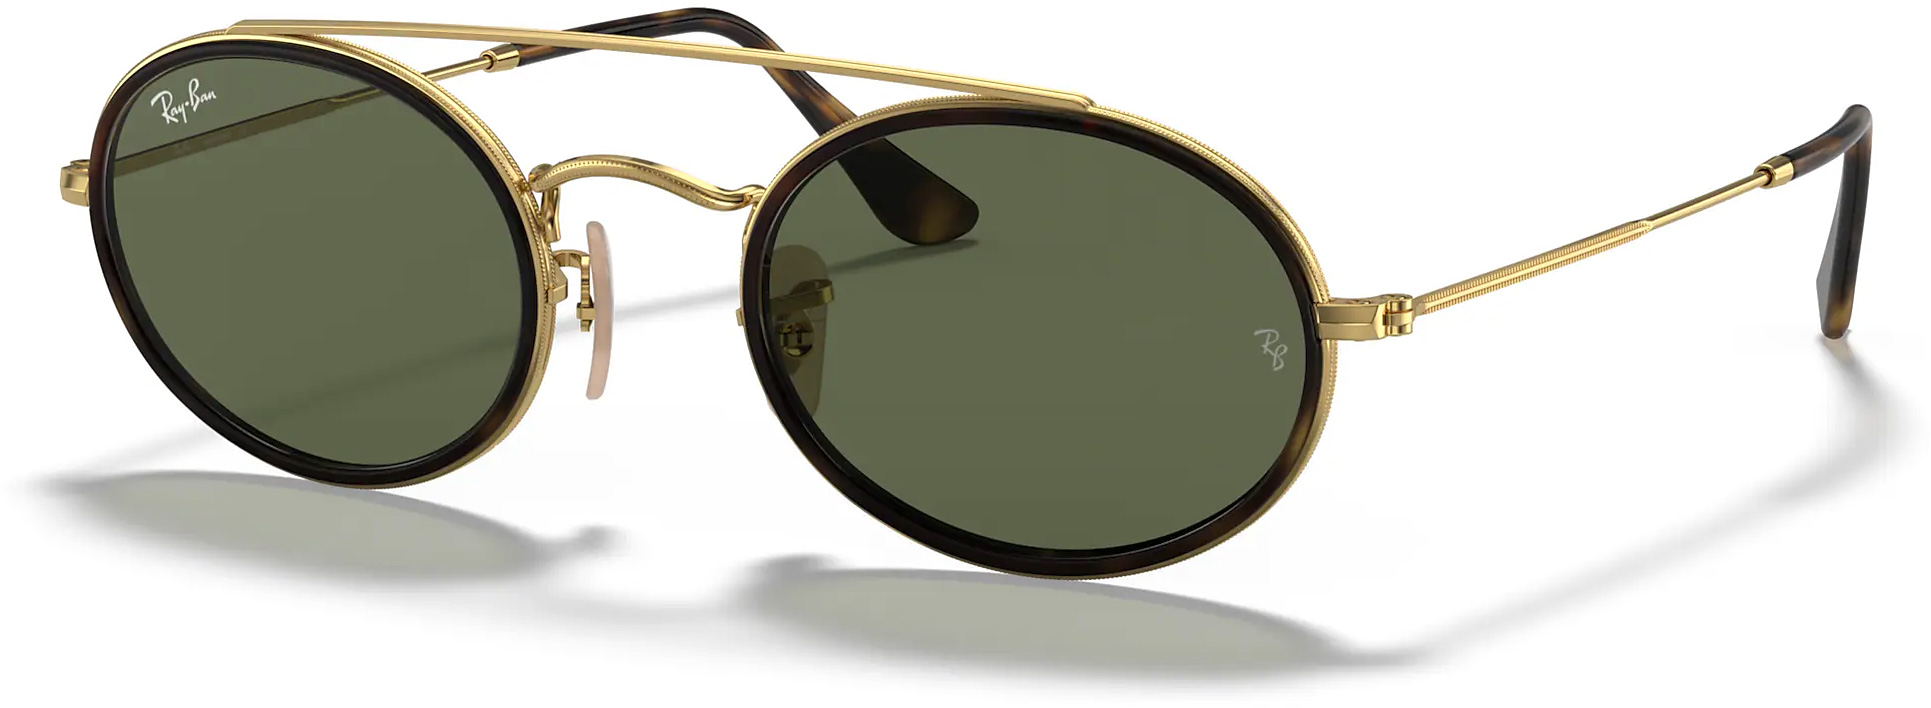 Ray-Ban RB3847N Oval Double Bridge - Aubrey Plaza - Operation Fortune